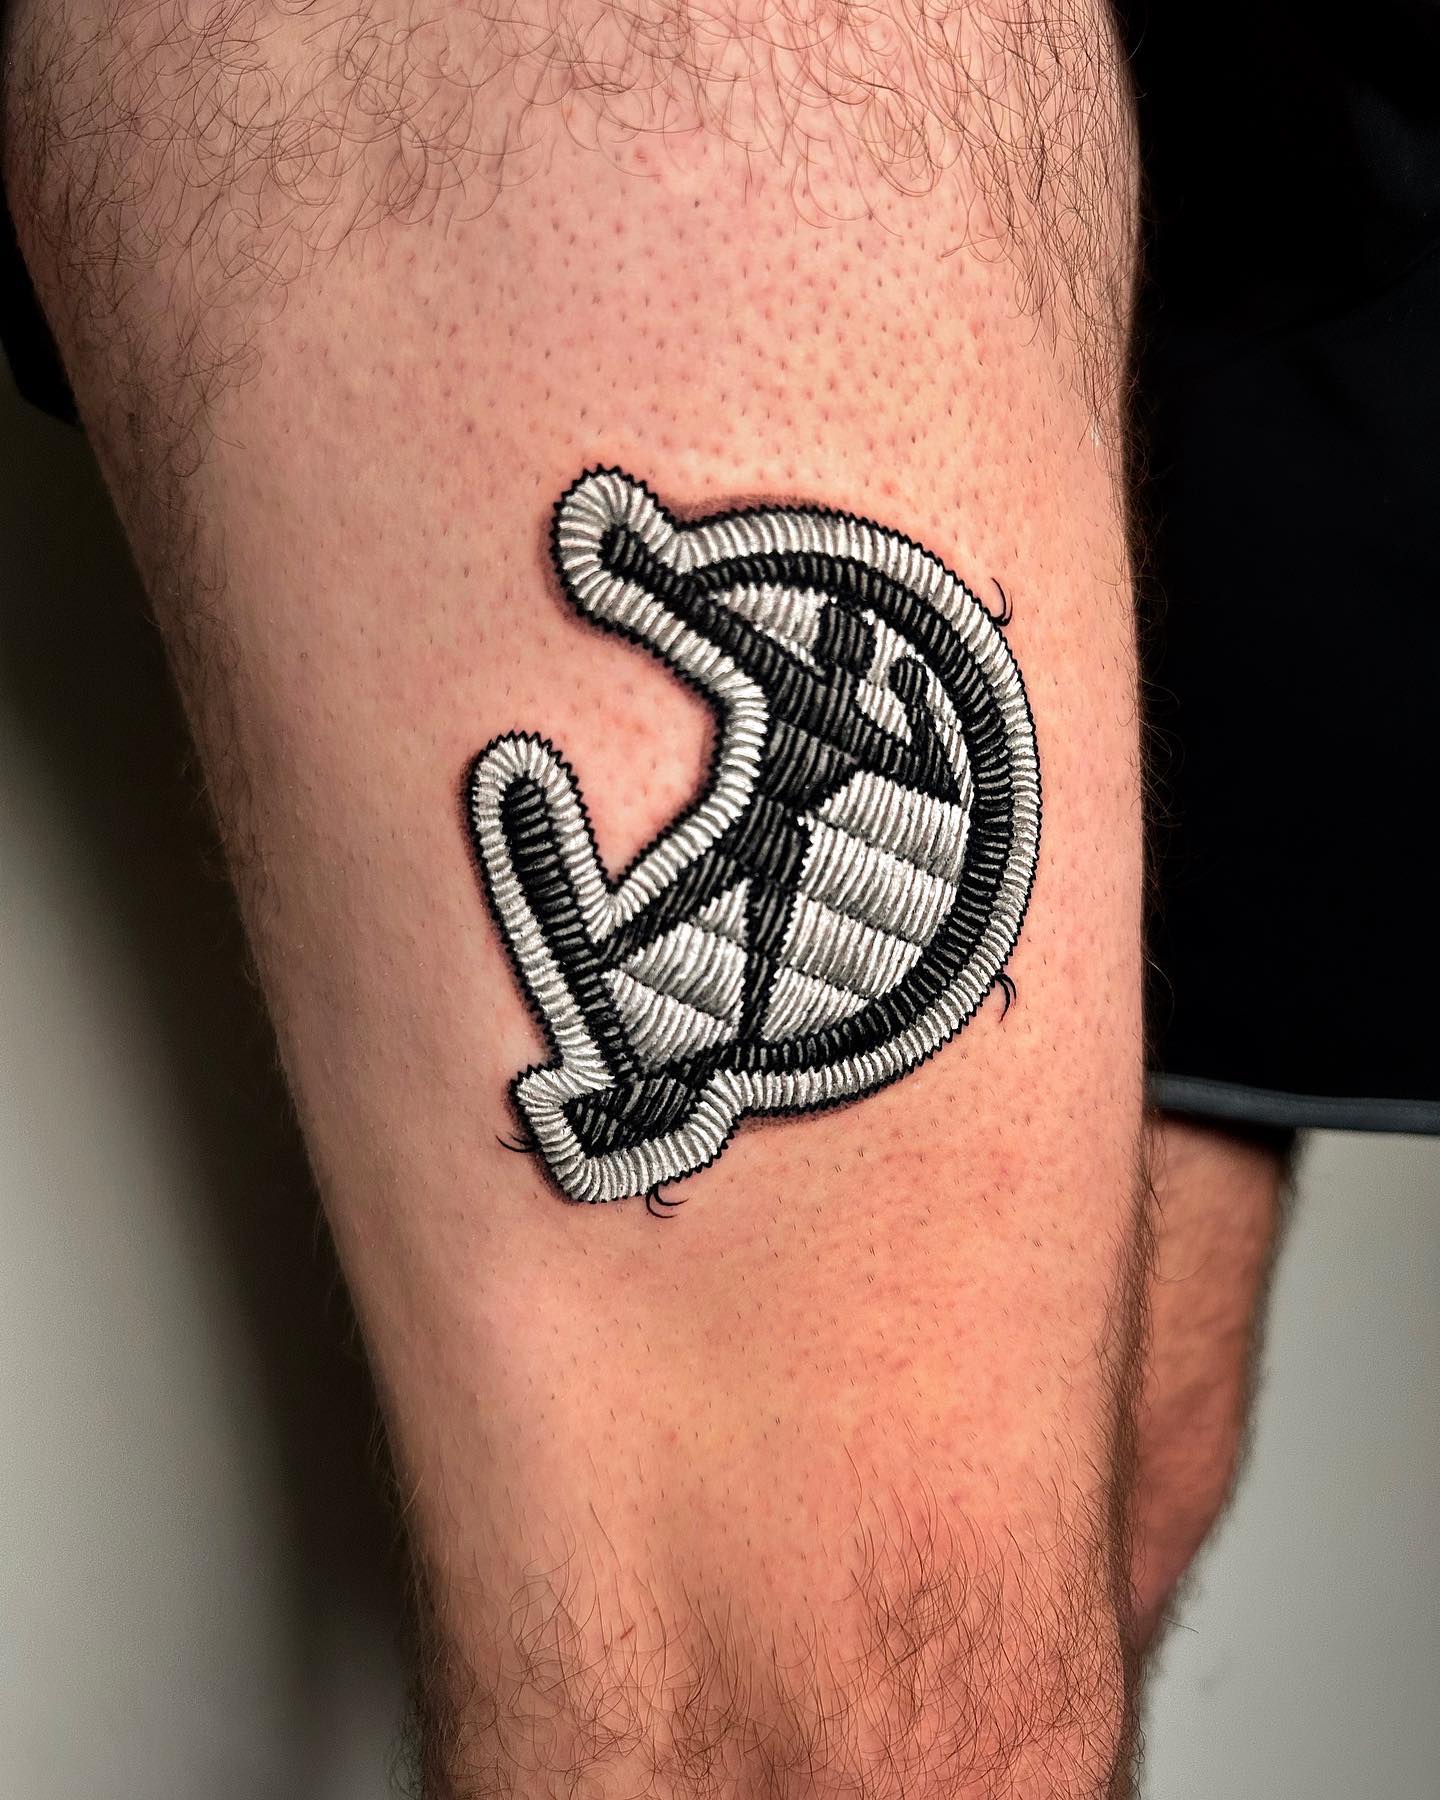 Black and white sickle and hammer patch tattoo